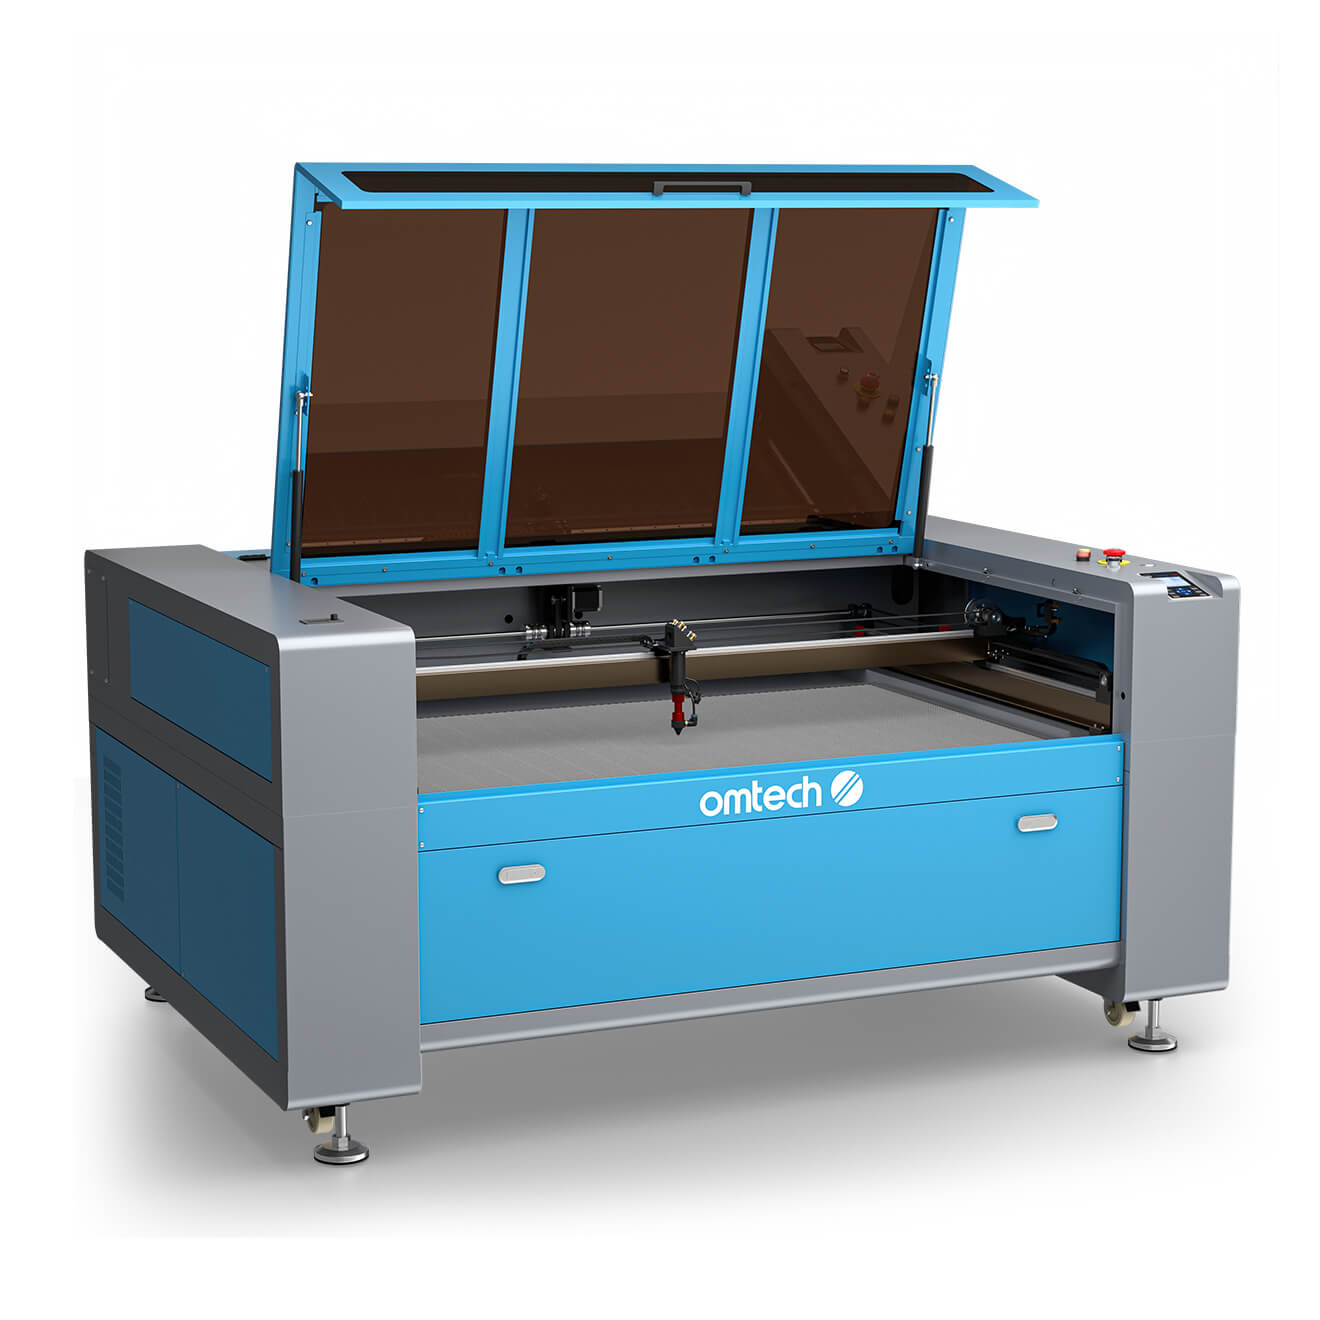 150W CO2 Laser Engraving Machine & Cutter with 1600x1000mm Working Area | Max-1615